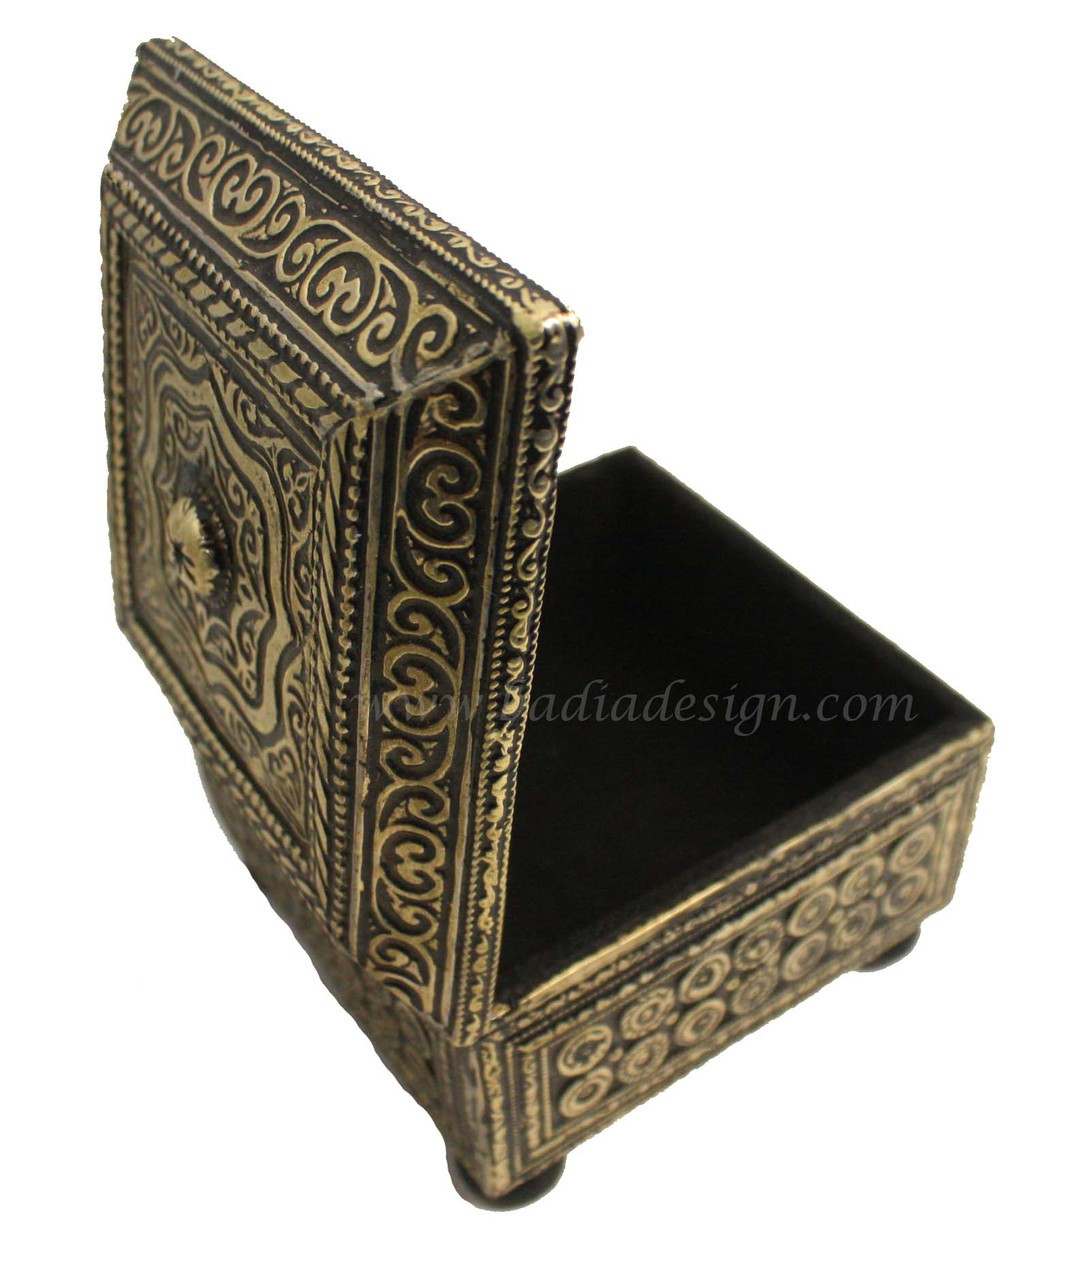 Square Metal Jewelry Box with Leather - HD156